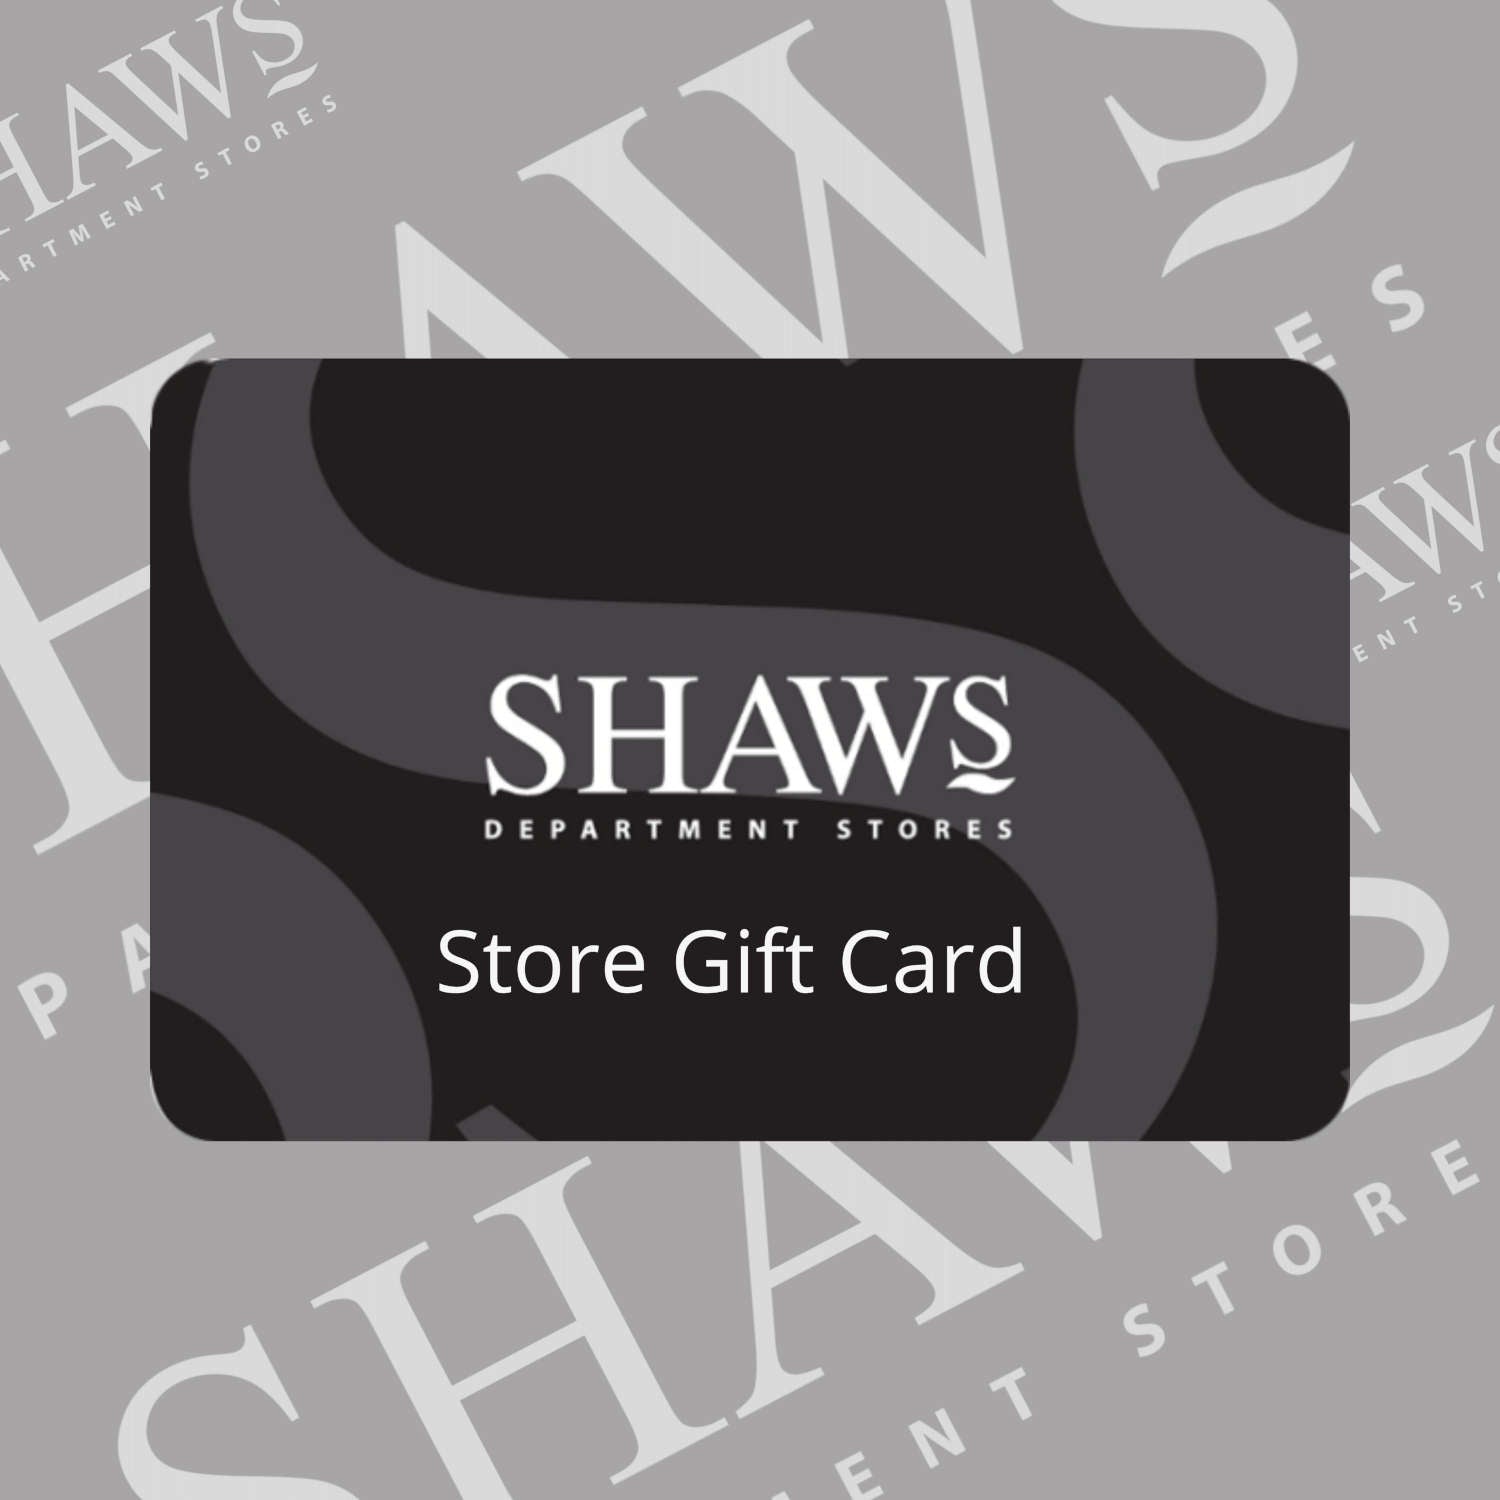 Shaws Store Gift Card 1 Shaws Department Stores